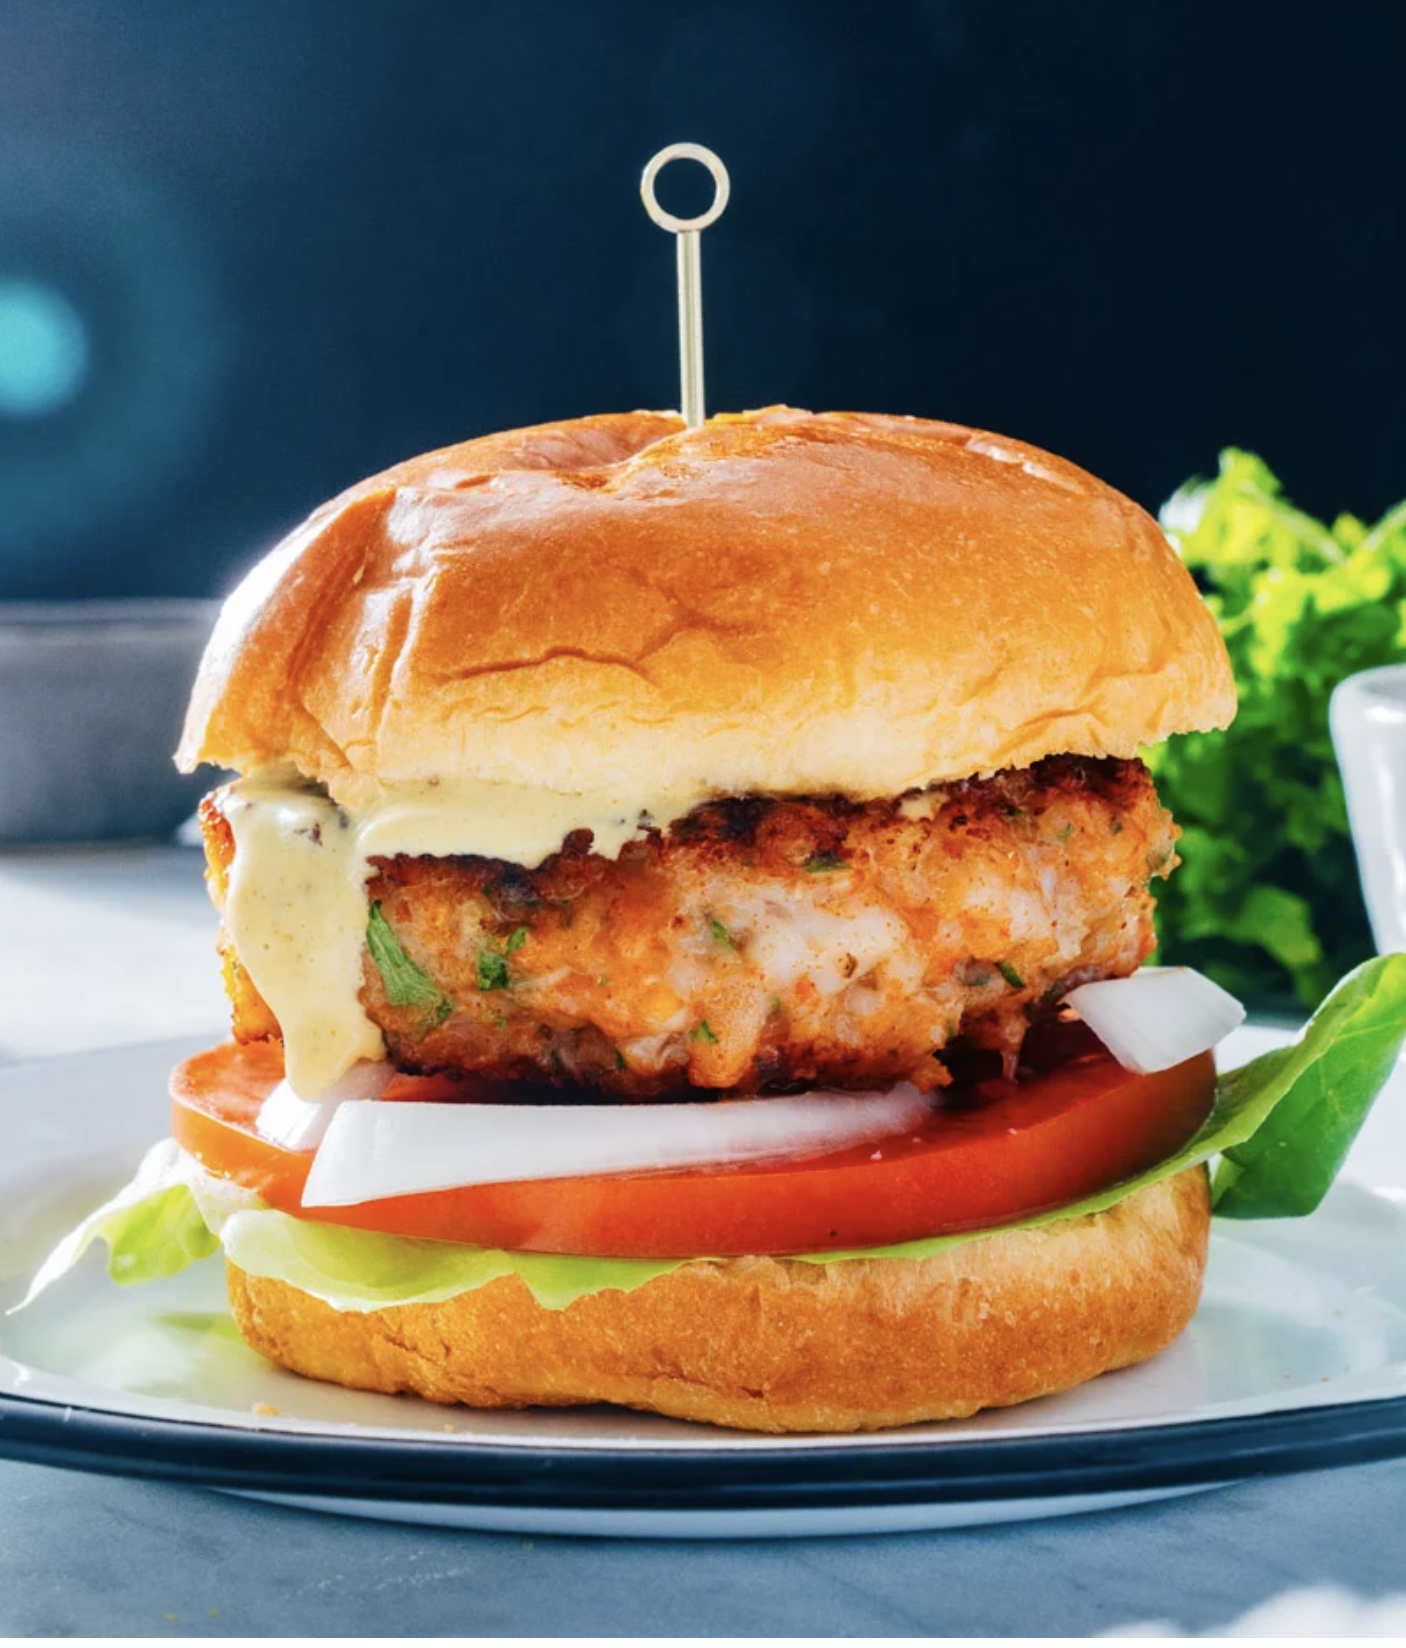 Burger with a crispy chicken patty, lettuce, tomato, and sauce on a brioche bun, skewered with a toothpick